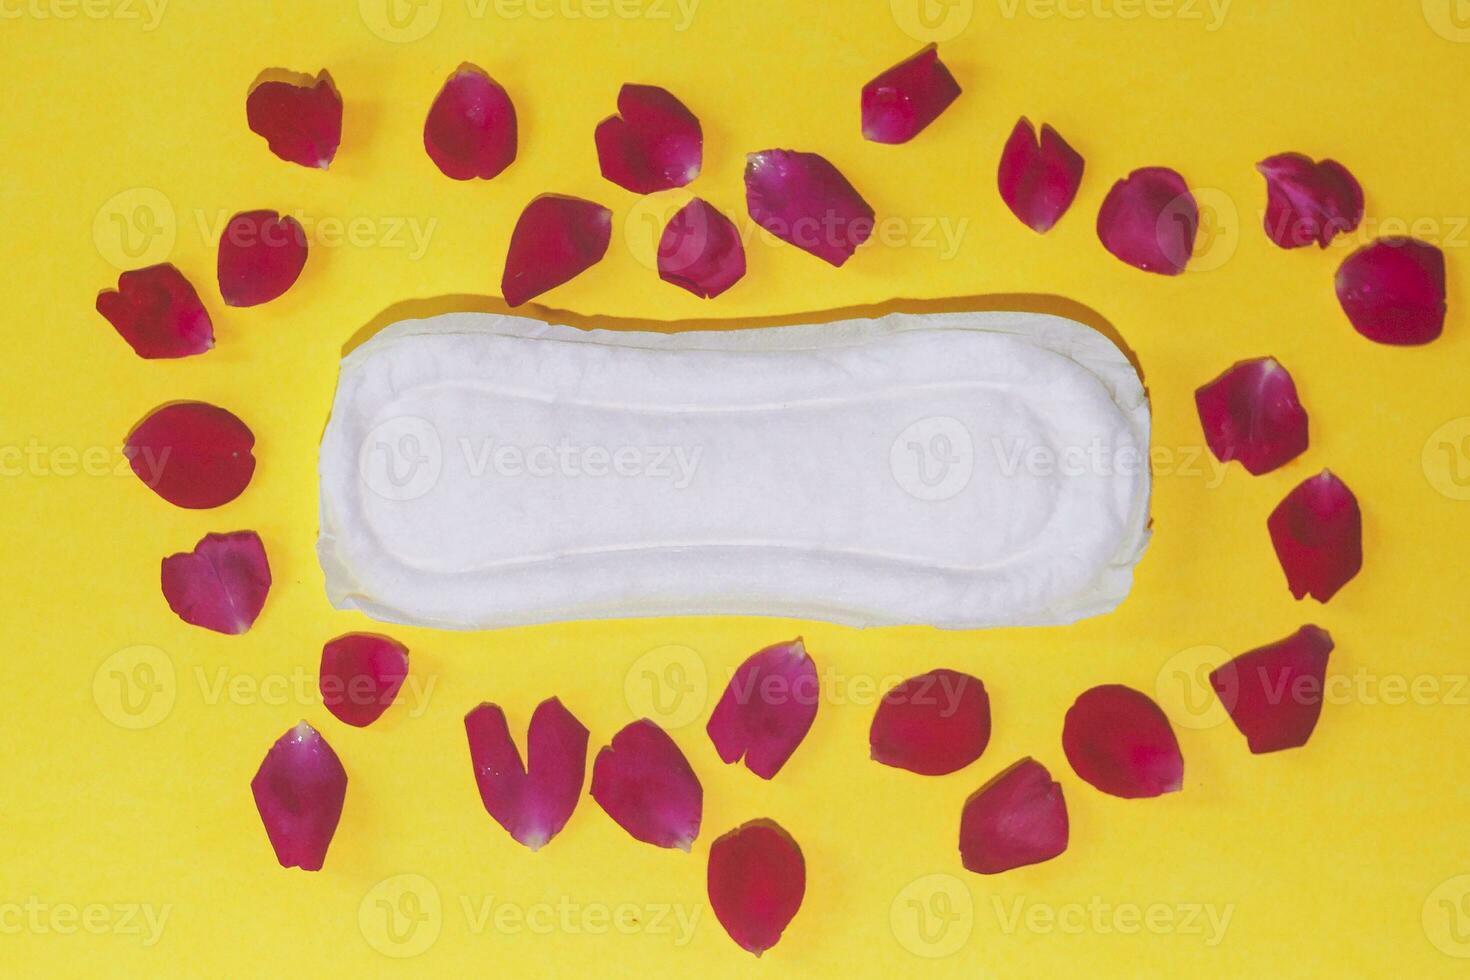 Female's hygiene products on yellow background. Concept of critical days, menstrual cycle, period days, PMS photo